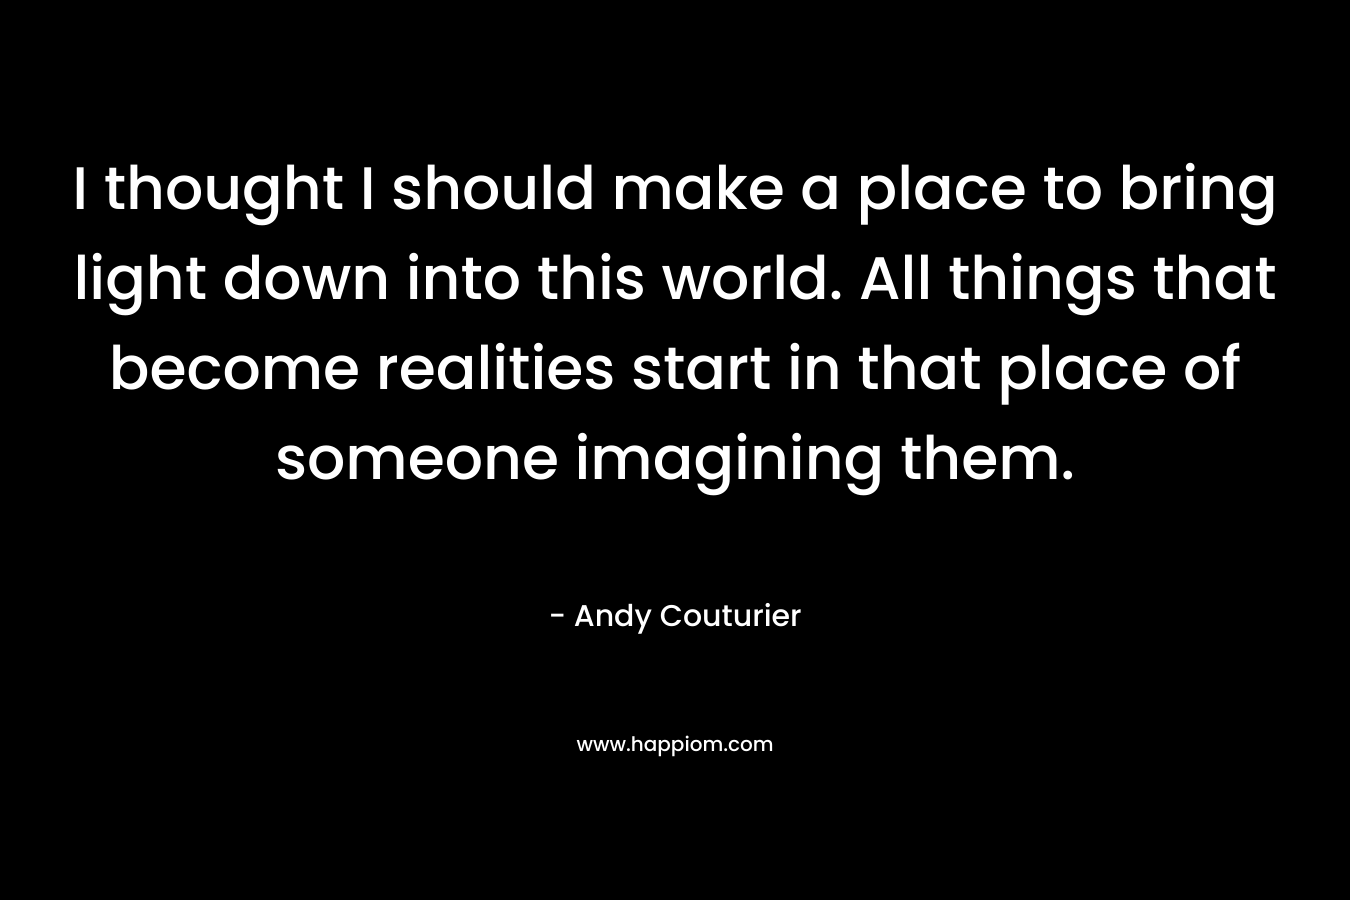 I thought I should make a place to bring light down into this world. All things that become realities start in that place of someone imagining them. – Andy Couturier